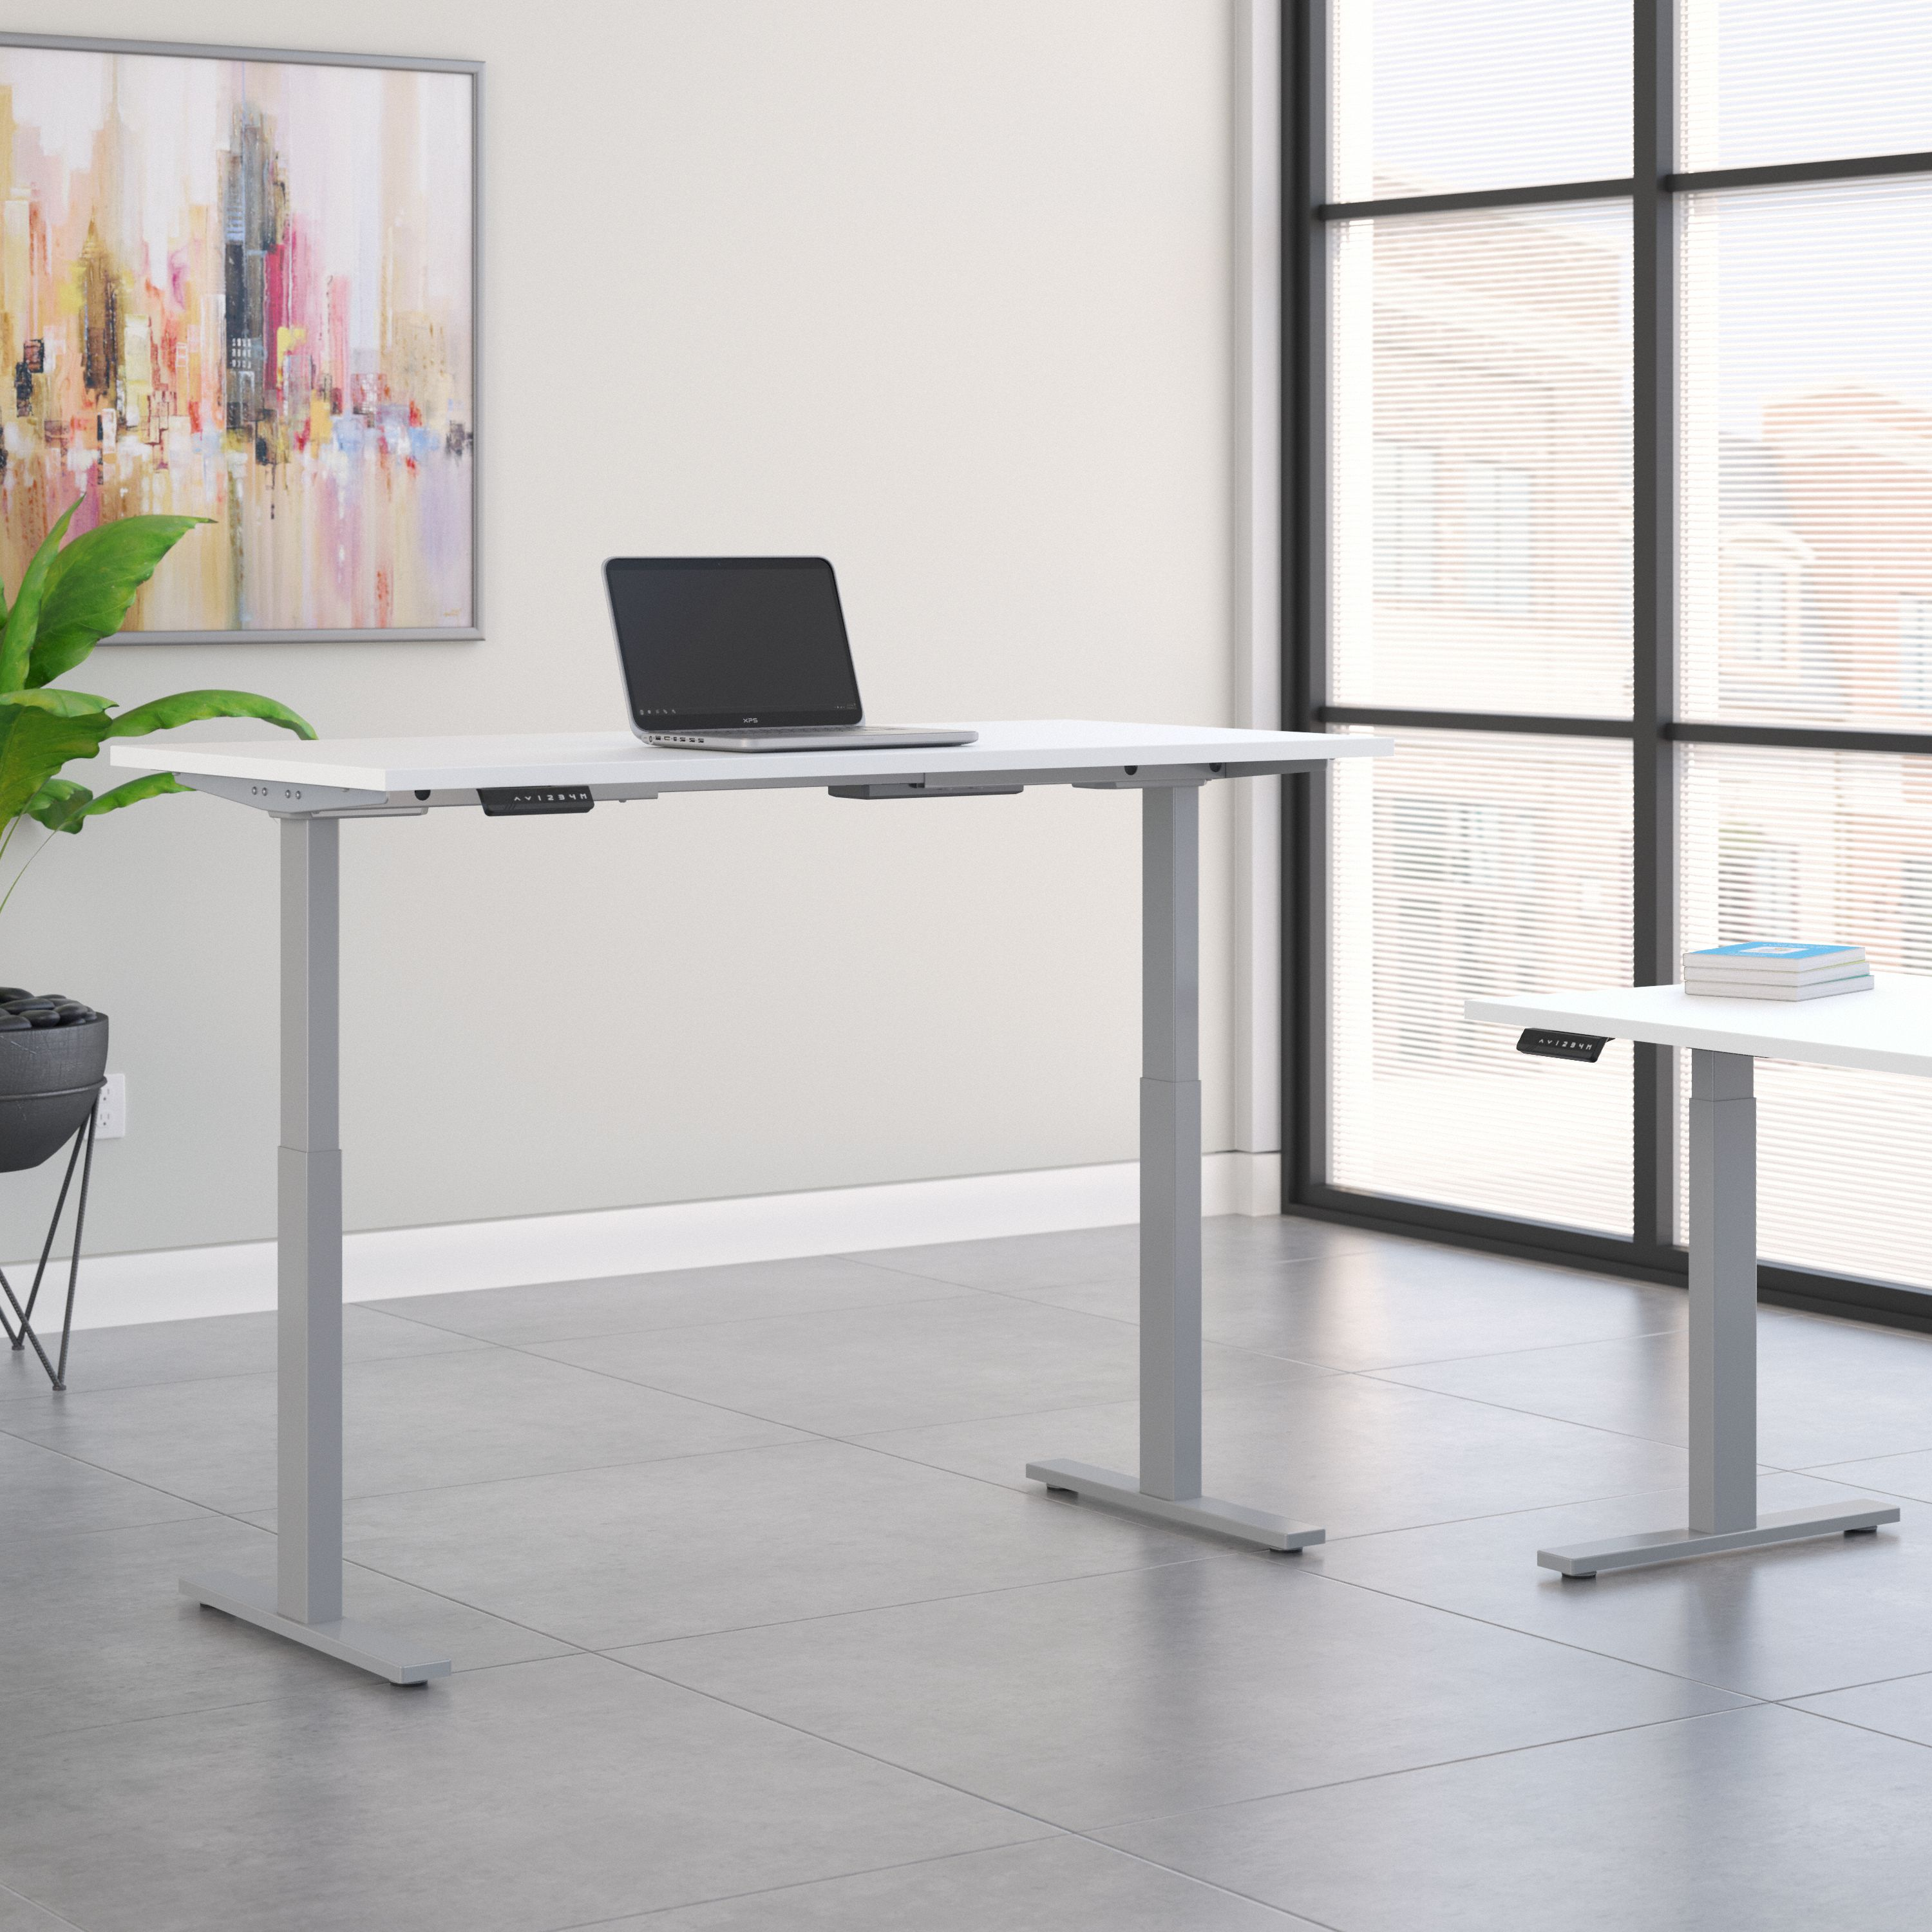 Shop Move 60 Series by Bush Business Furniture 60W x 30D Height Adjustable Standing Desk 01 M6S6030WHSK #color_white/cool gray metallic